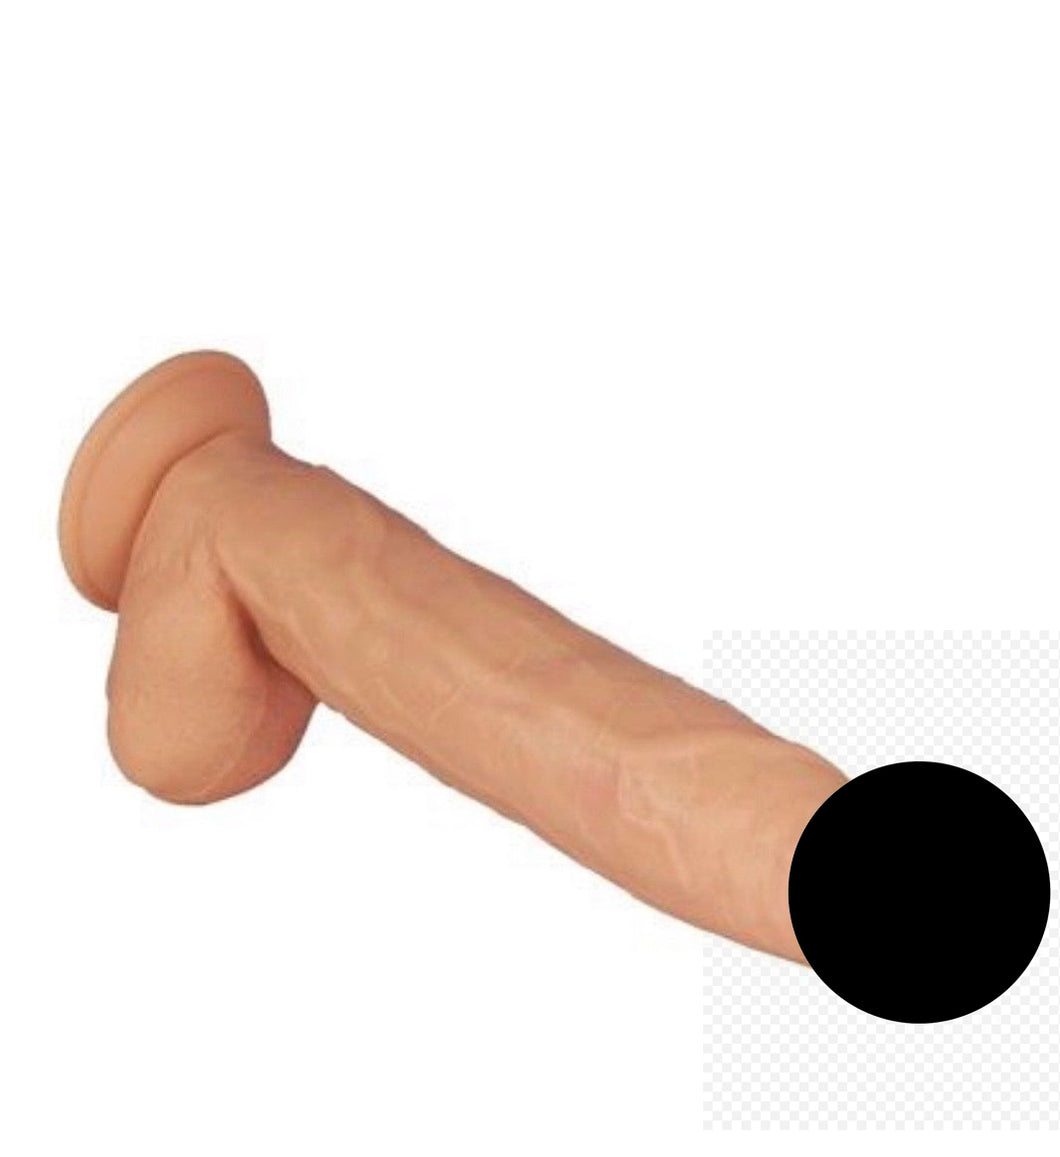 12 inch realistic dildo with Suction